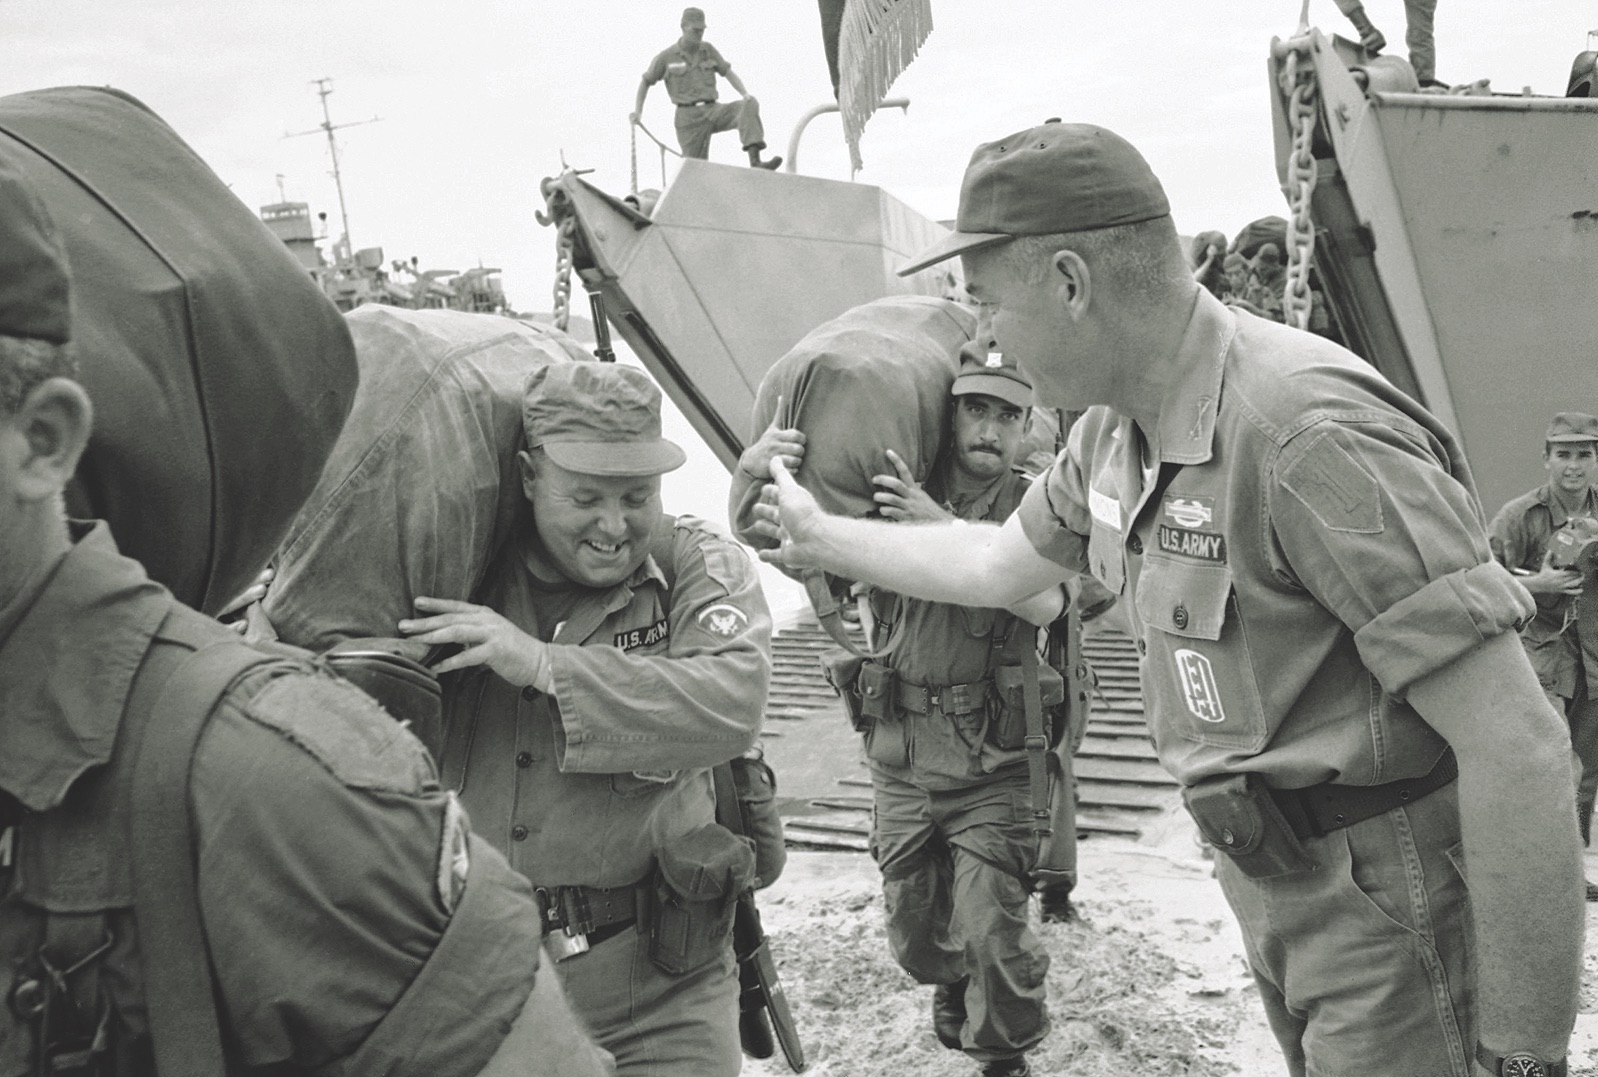 Col. James E. Simmons of the 1st Infantry Division’s 2nd Brigade gives a pat on the back to a soldier landing at Cam Ranh Bay. (AP Photo/Horst Faas)